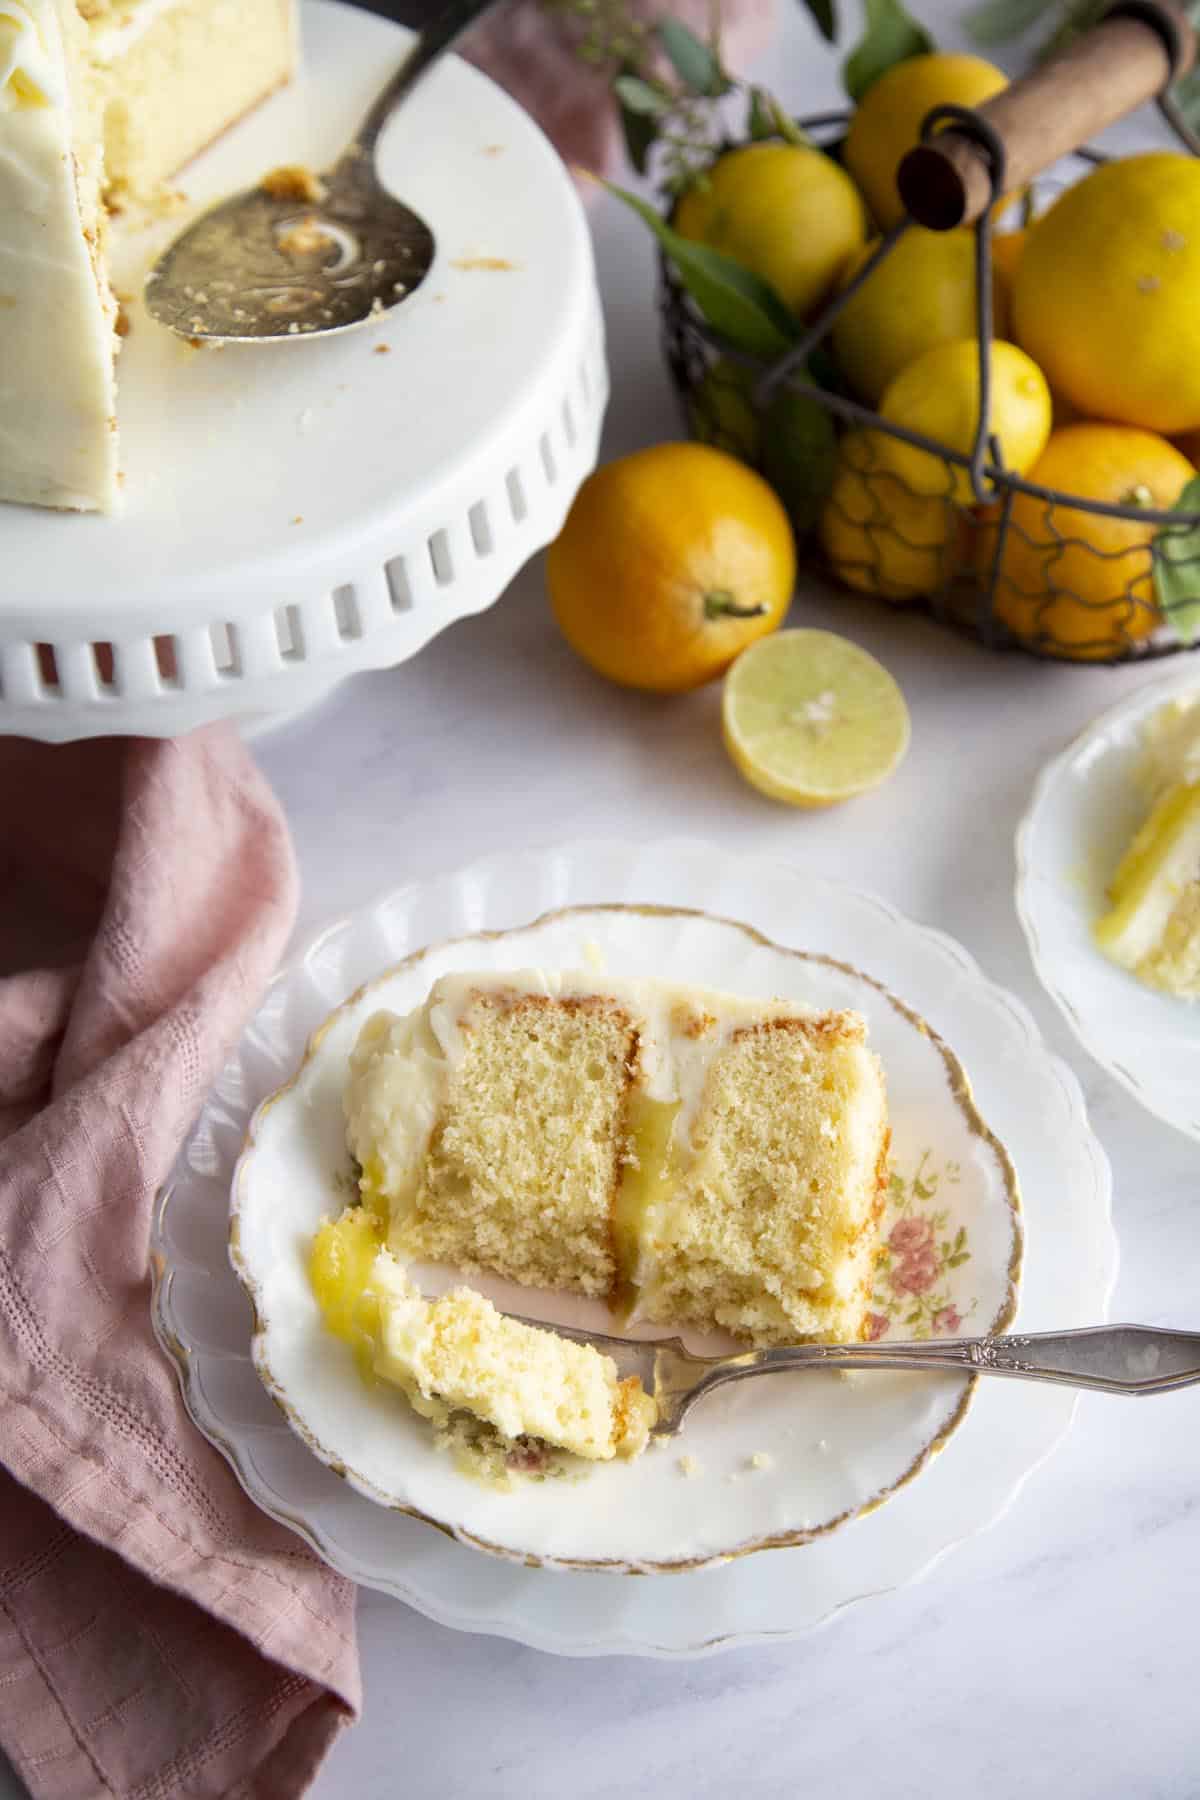 A slice of lemon cake on a plate, a bite is taken off and on a fork